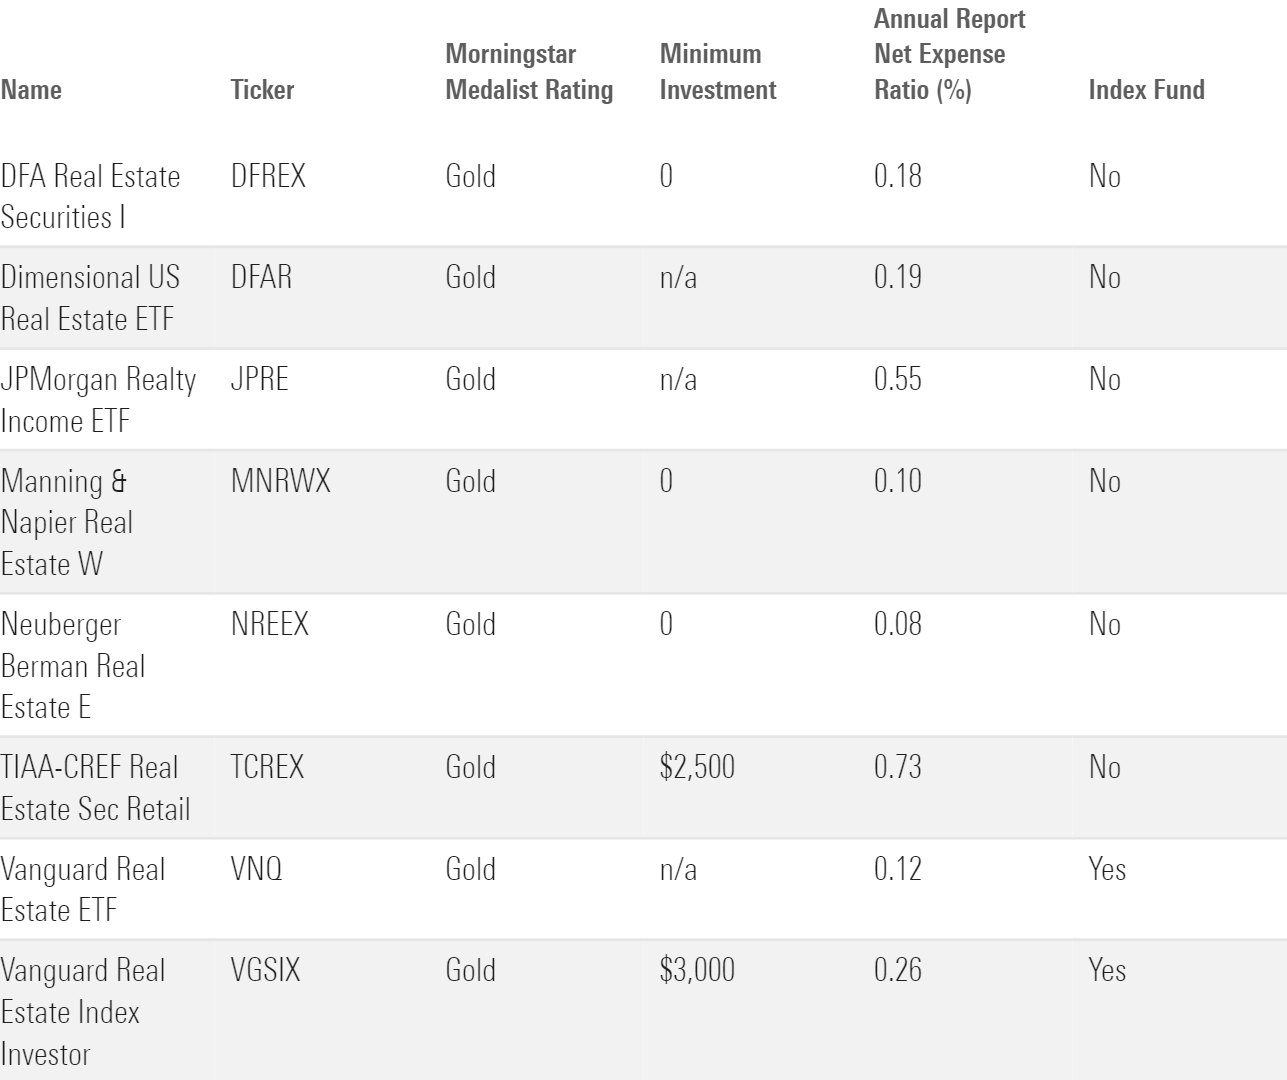 A table showing the Morningstar Medalist Rating and other key information on several highly rated real estate funds.